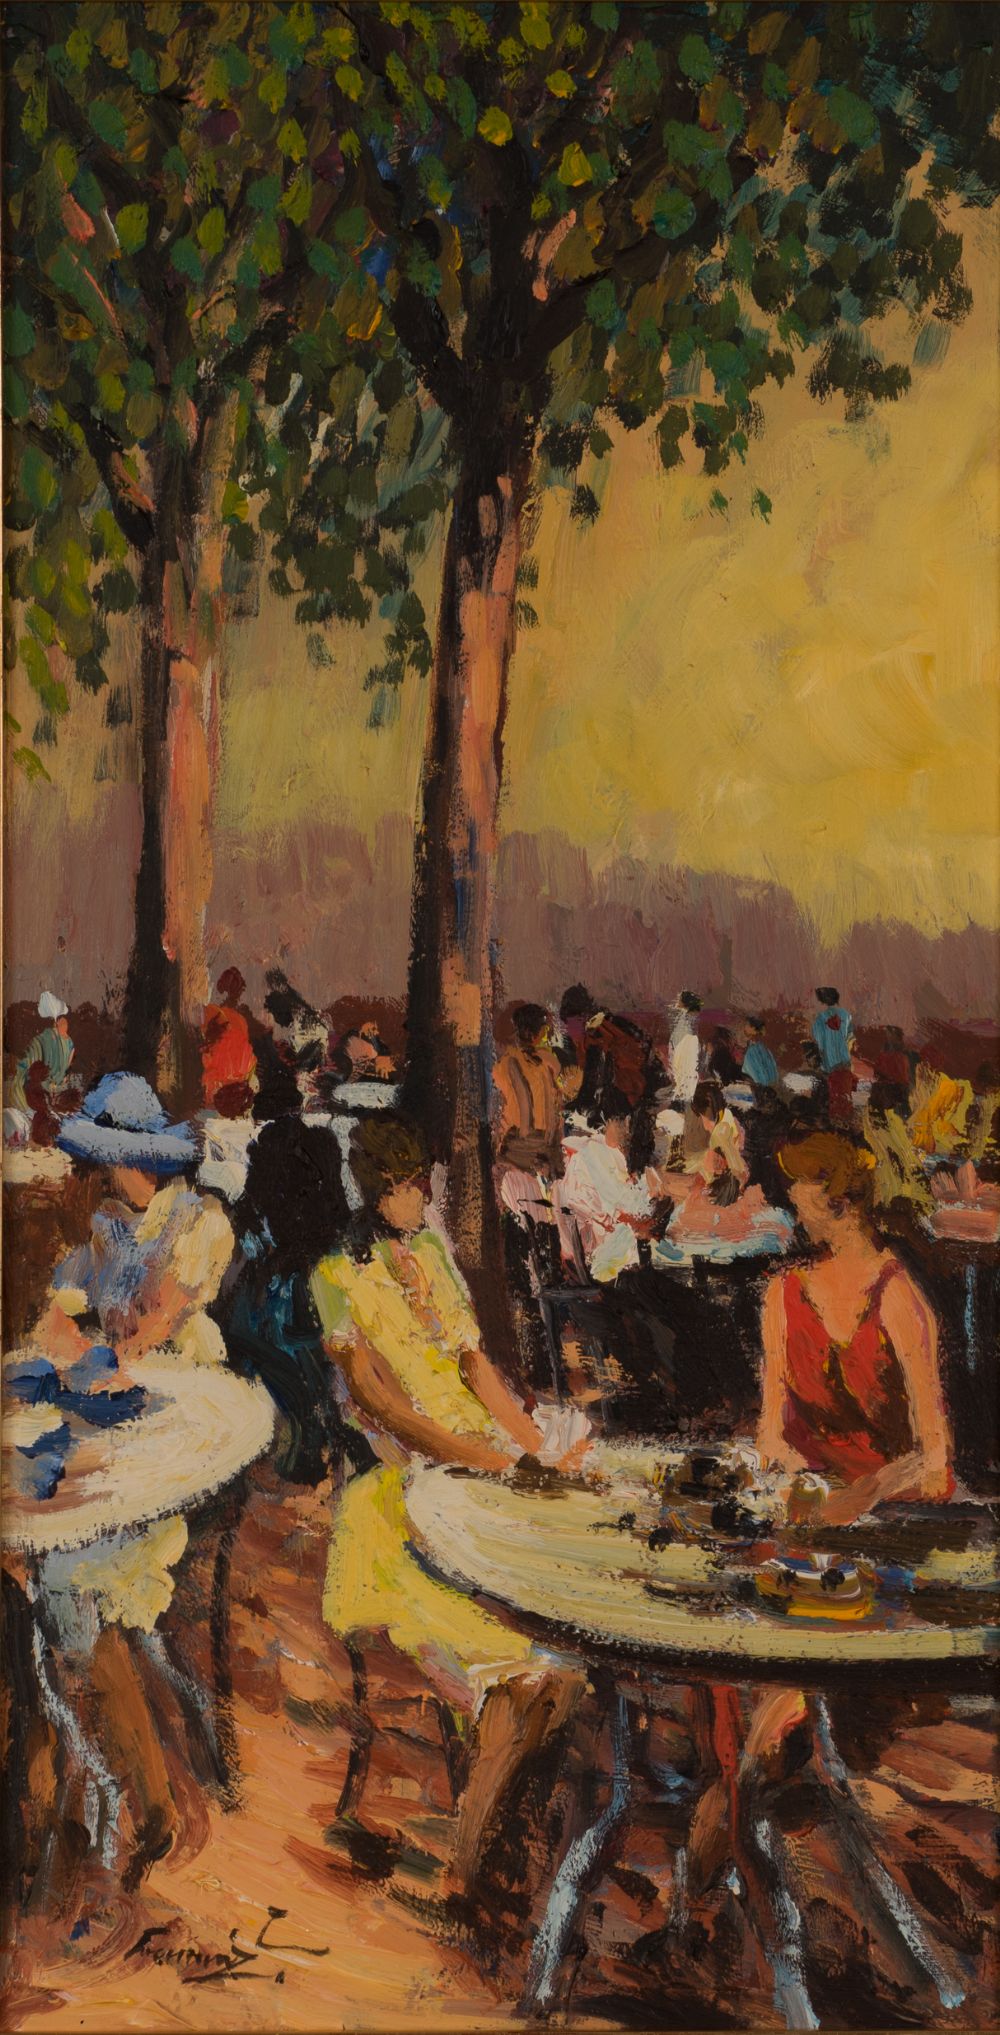 ALFRESCO by William Cunningham  at Dolan's Art Auction House